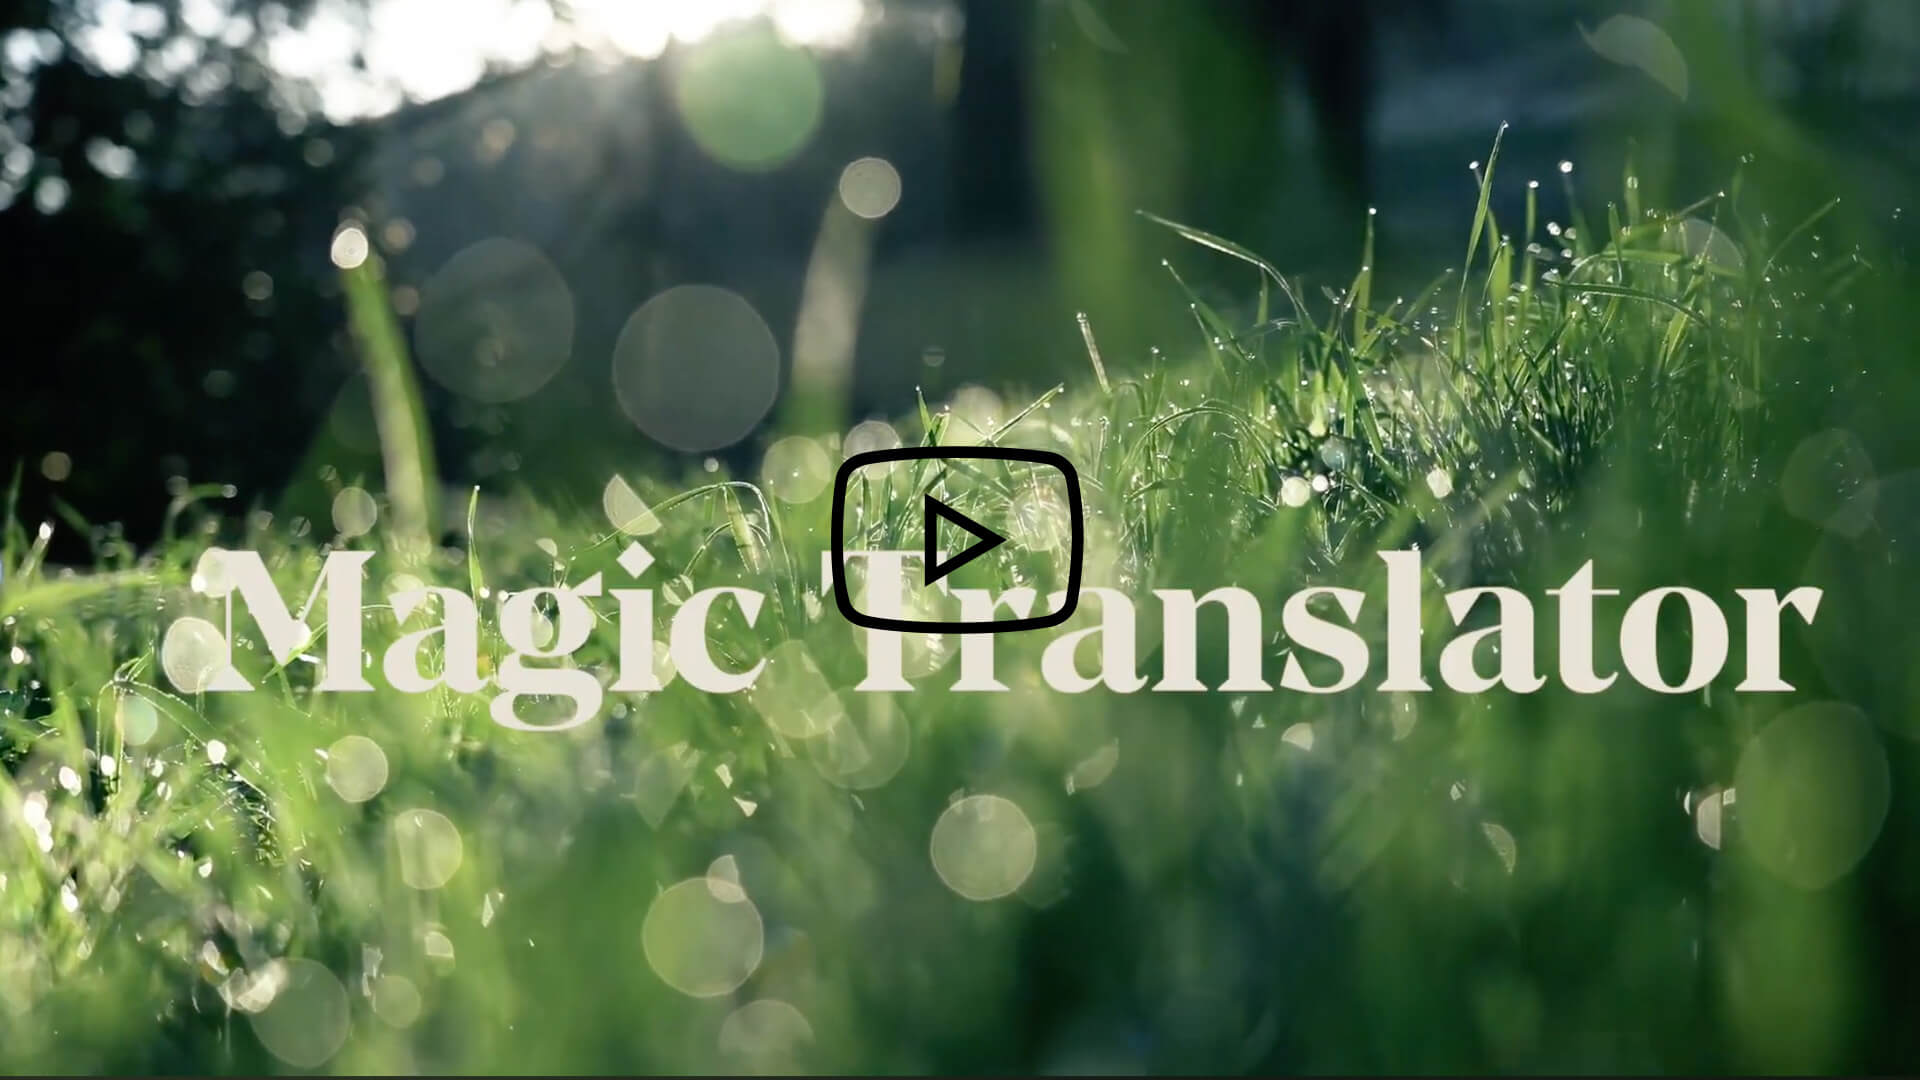 Automate hotel website translations with our new magic translator